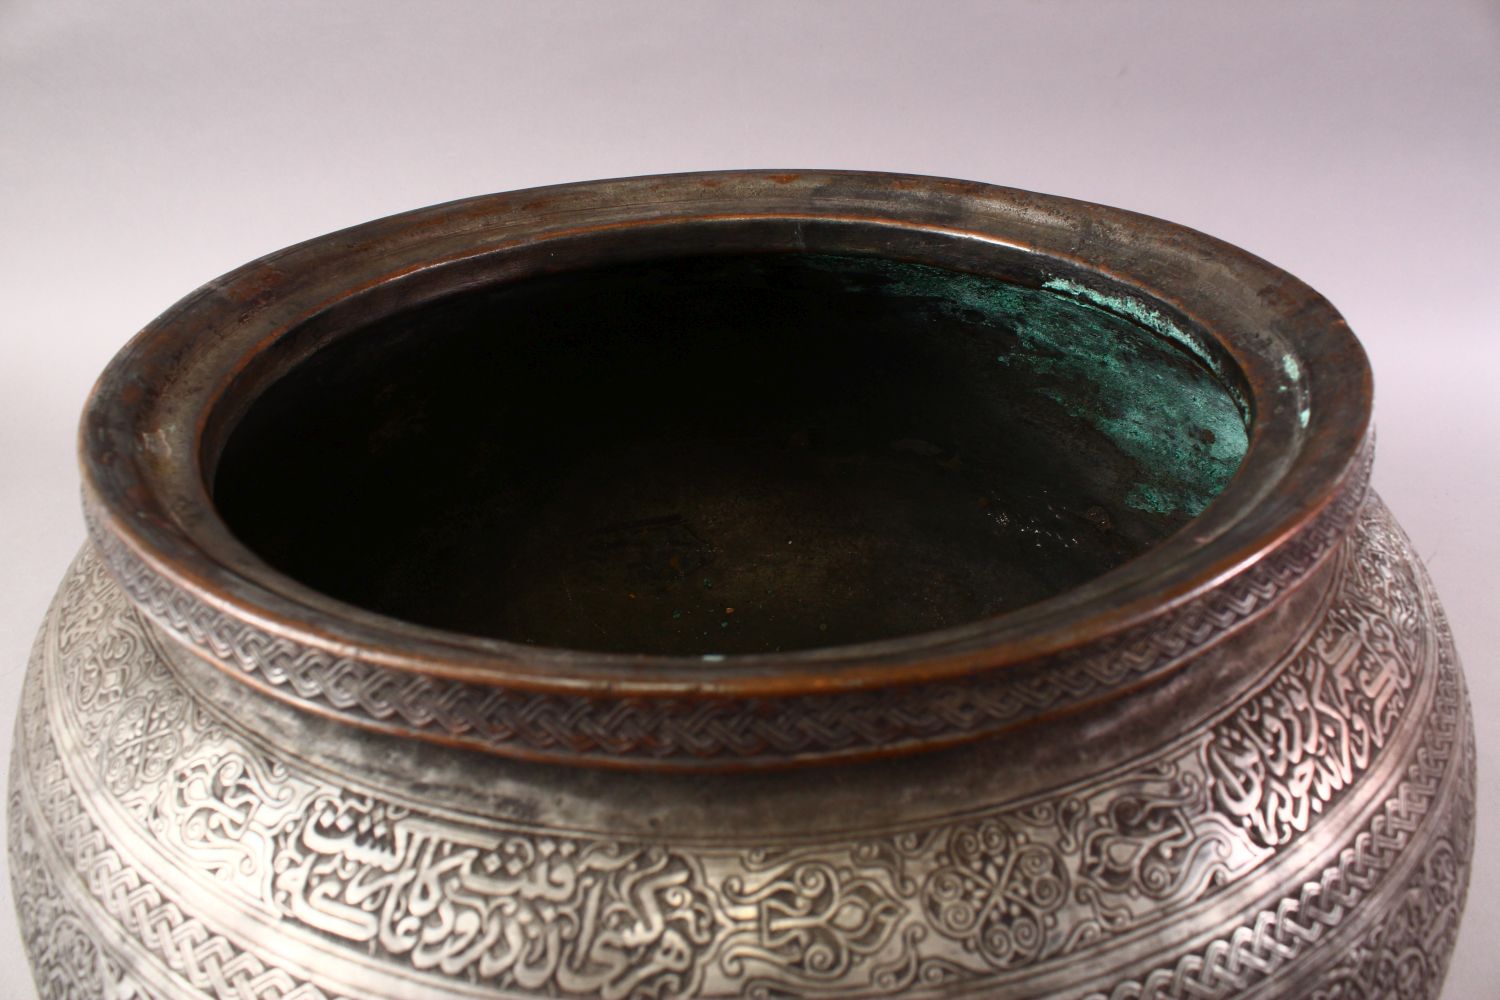 A LARGE ISLAMIC TINNED BRONZE SAFAVID CALLIGRAPHIC BOWL, the body with chased formal intertwined - Image 13 of 13